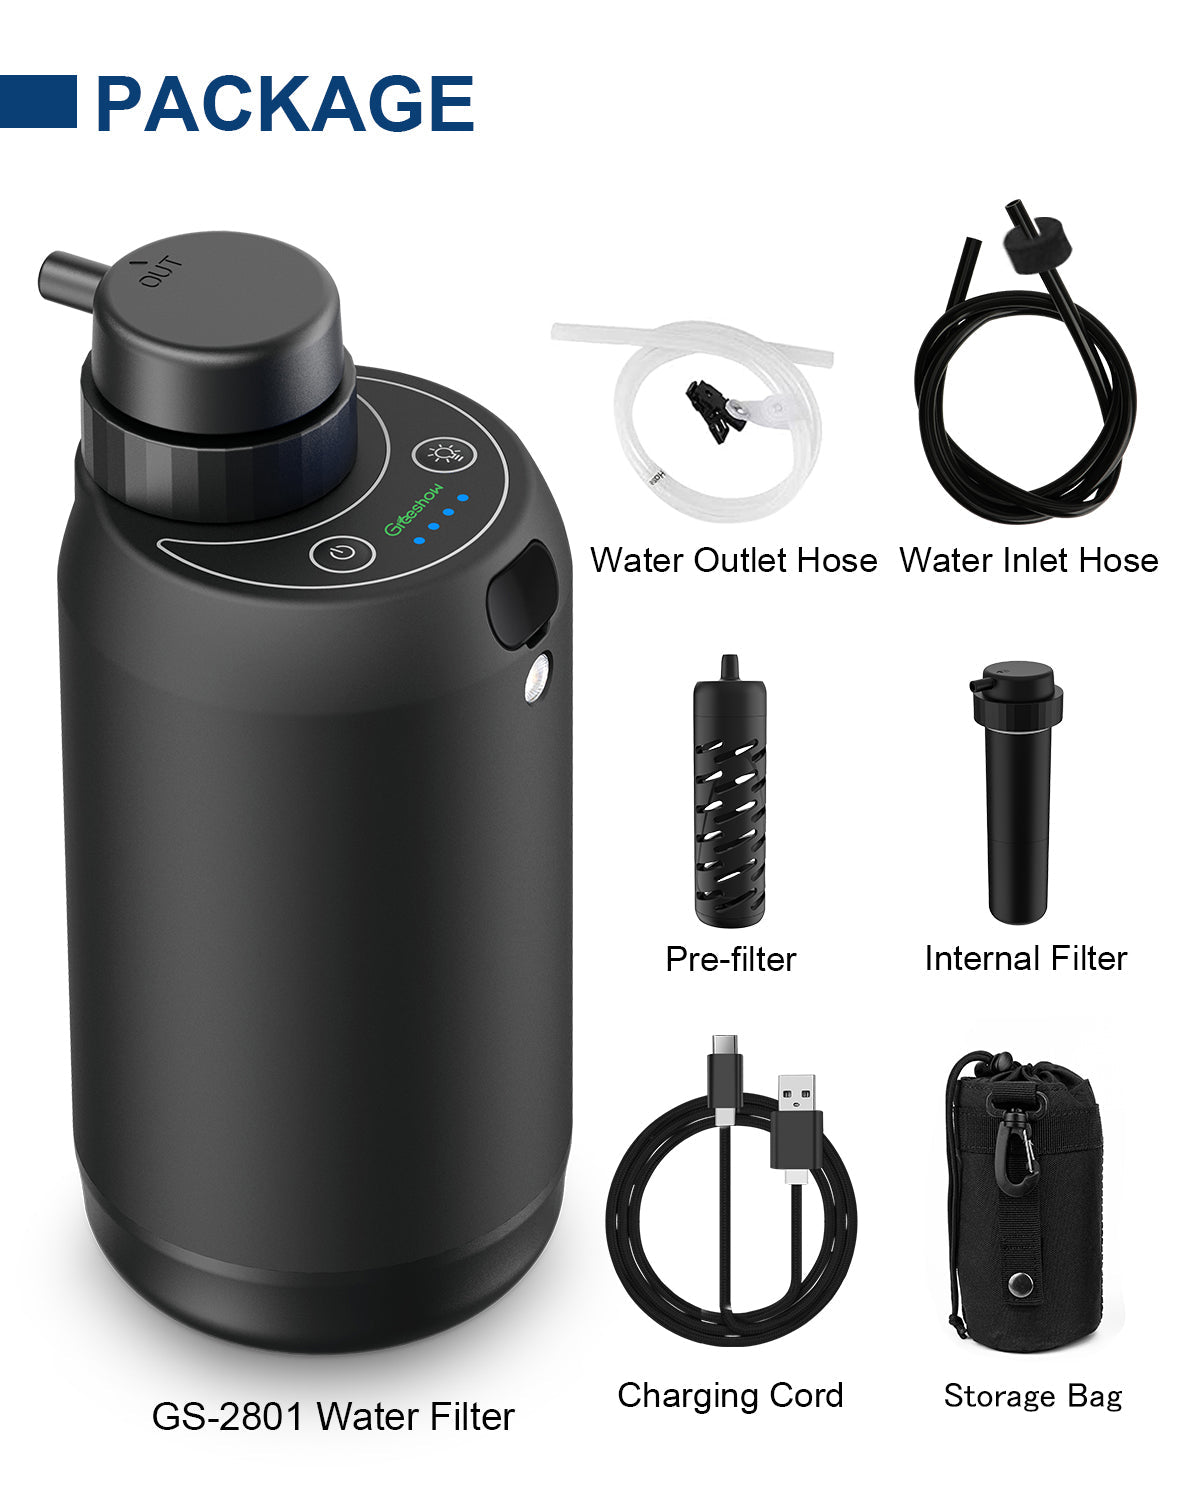 BKLES Electric Portable Water Filter - 0.01 Micron 5-Stage Water Purifier Survival with Emergency Lighting Water Purification System for Camping